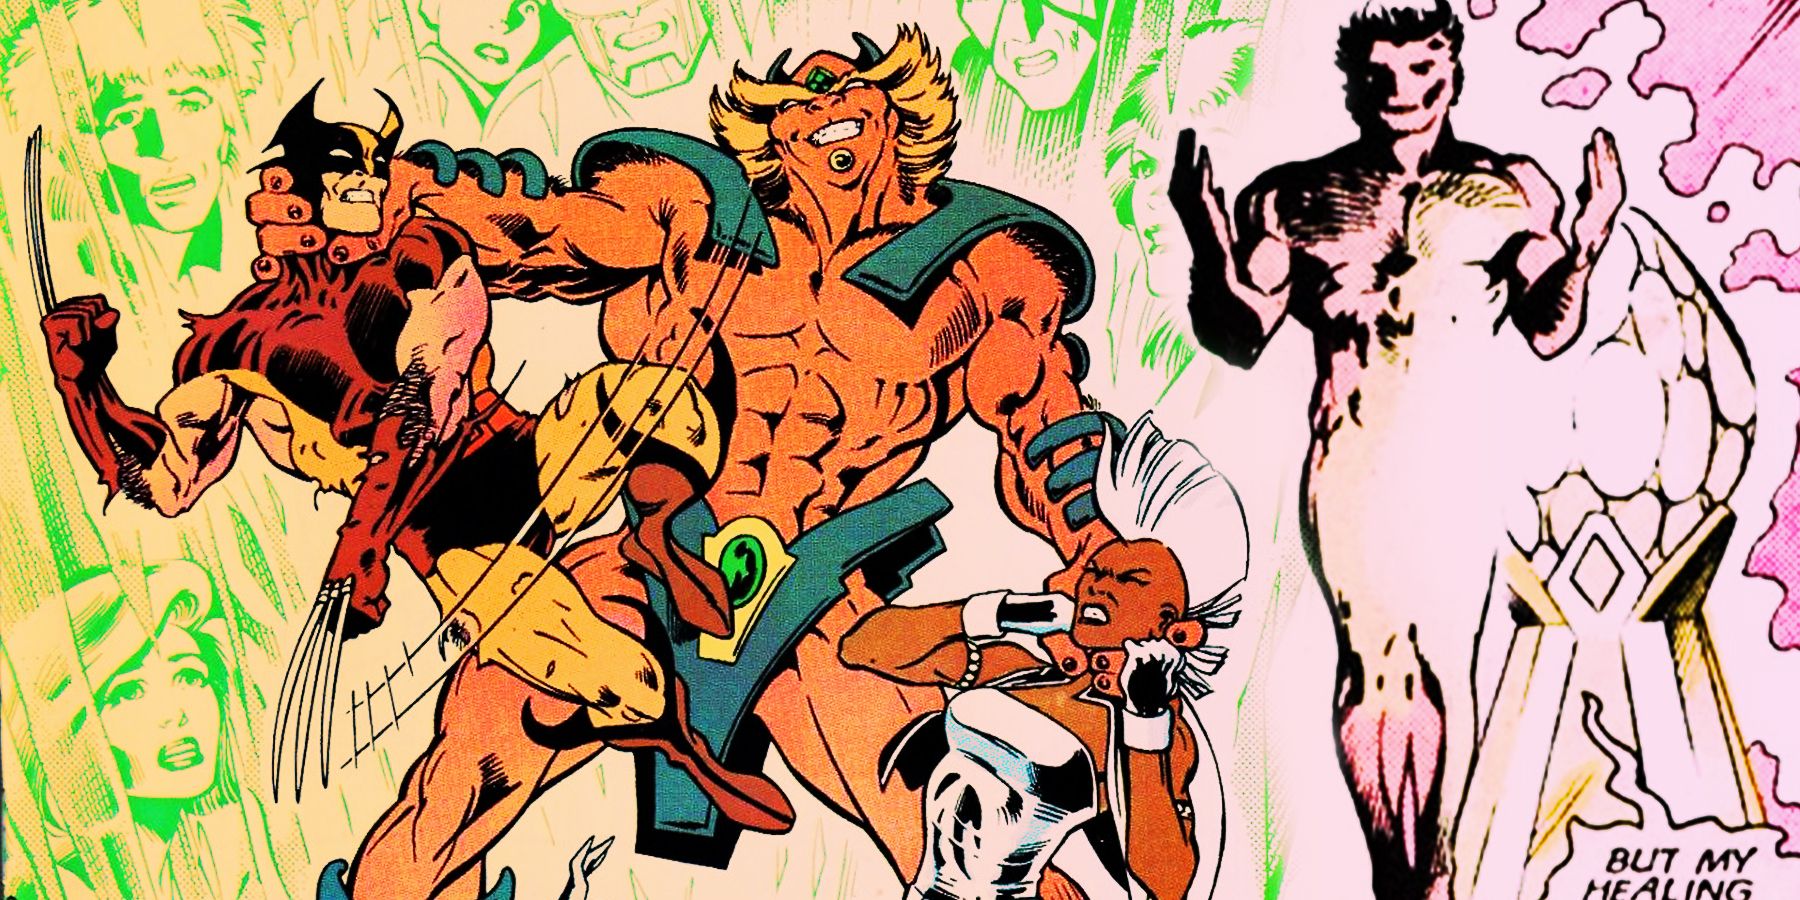 On the left, Wolverine is held by the neck by Horde, who also has Storm in his grip, from 1987's 'Uncanny X-Men Annual #11'. On the right, Wolverine's body regenerates with a bright glow around and over his body.